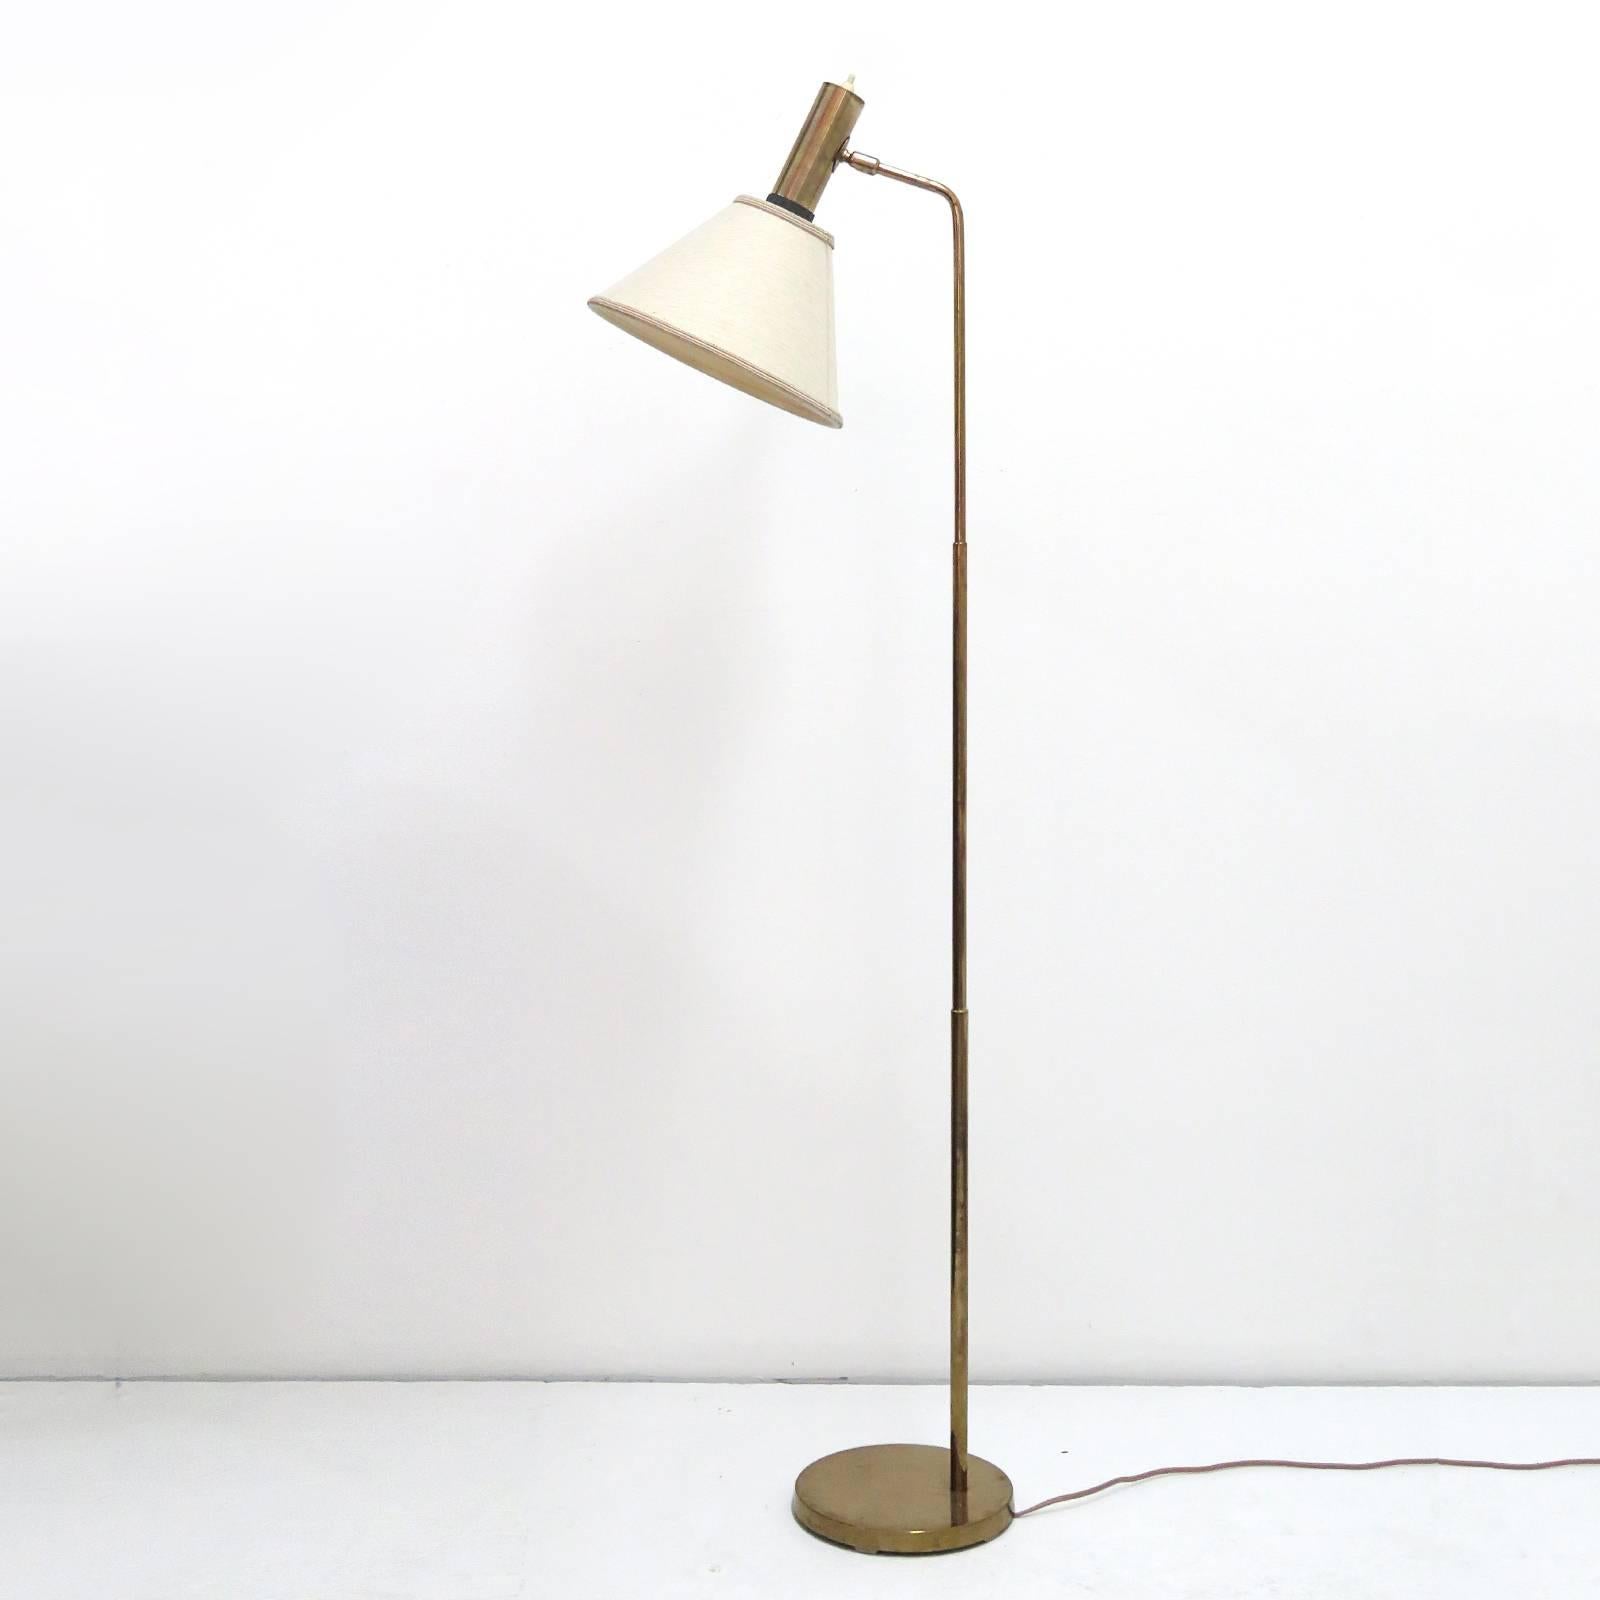 Minimal Danish brass floor lamp by Bergboms with original linen shade, on/off switch on top of the brass cylinder.